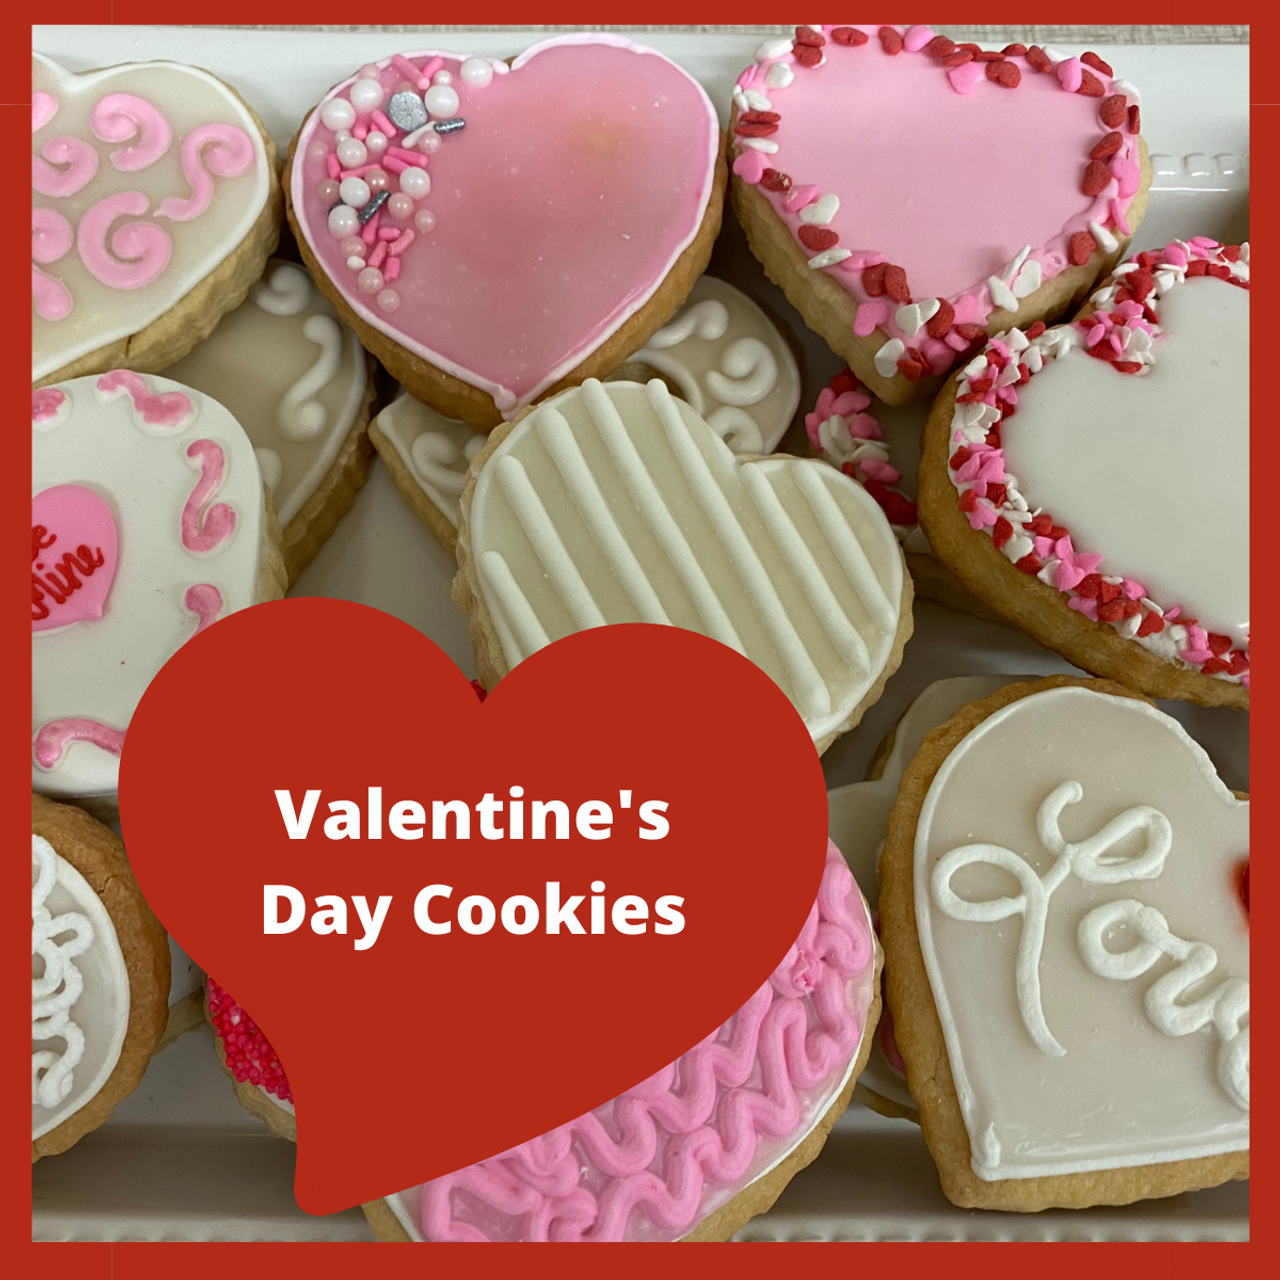 Heart Cookies - Cake and Candy Center, Inc.